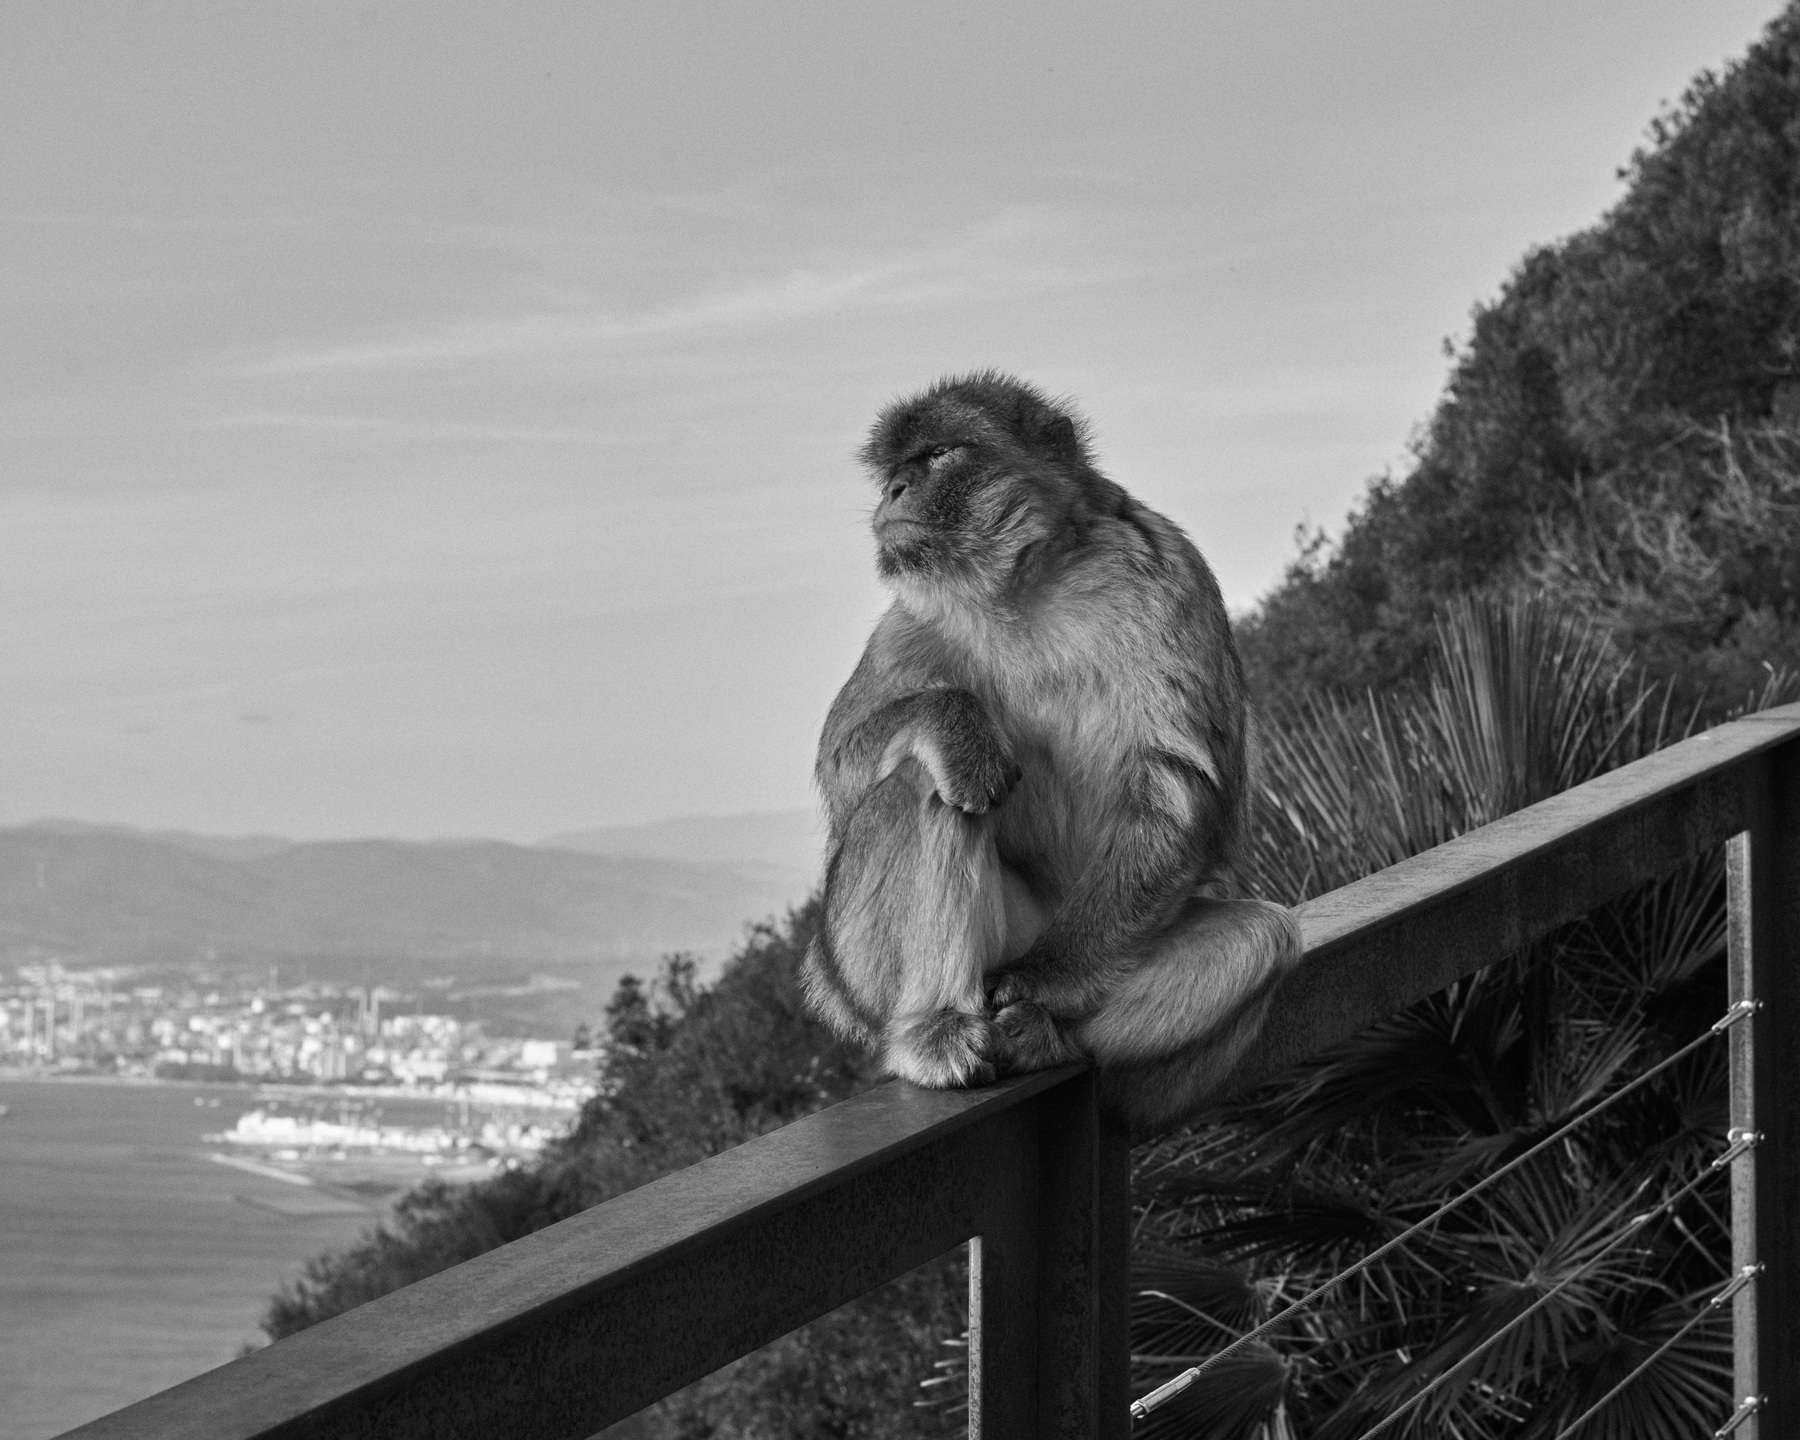 A monkey looking wistfully into the distance at profile to the camera. In the background you can see a distant Spanish City.